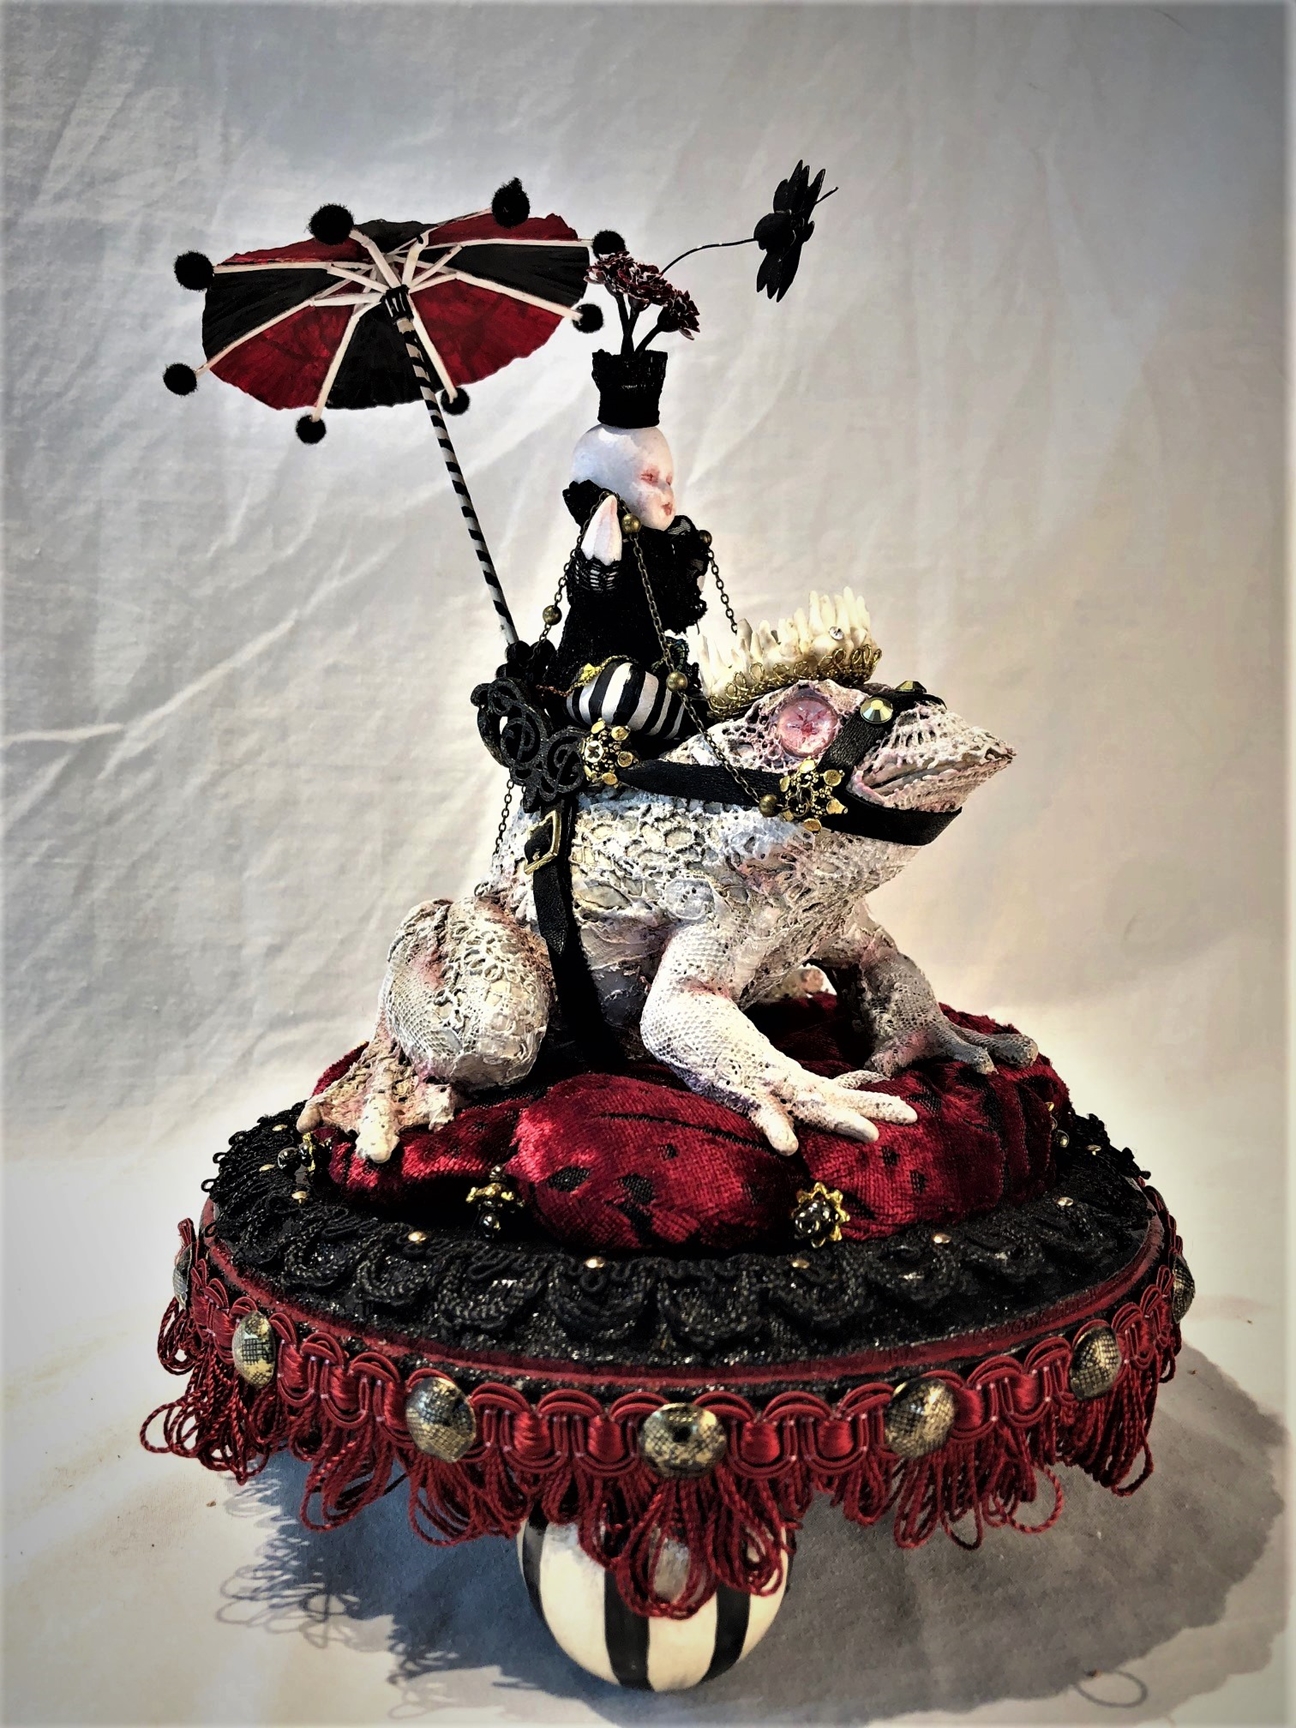 mixed media striped miniature gothic circus performer under a parasol rides a lace-covered vintage toy frog with a crown made of teeth on fabric and fringe decorated wooden platform